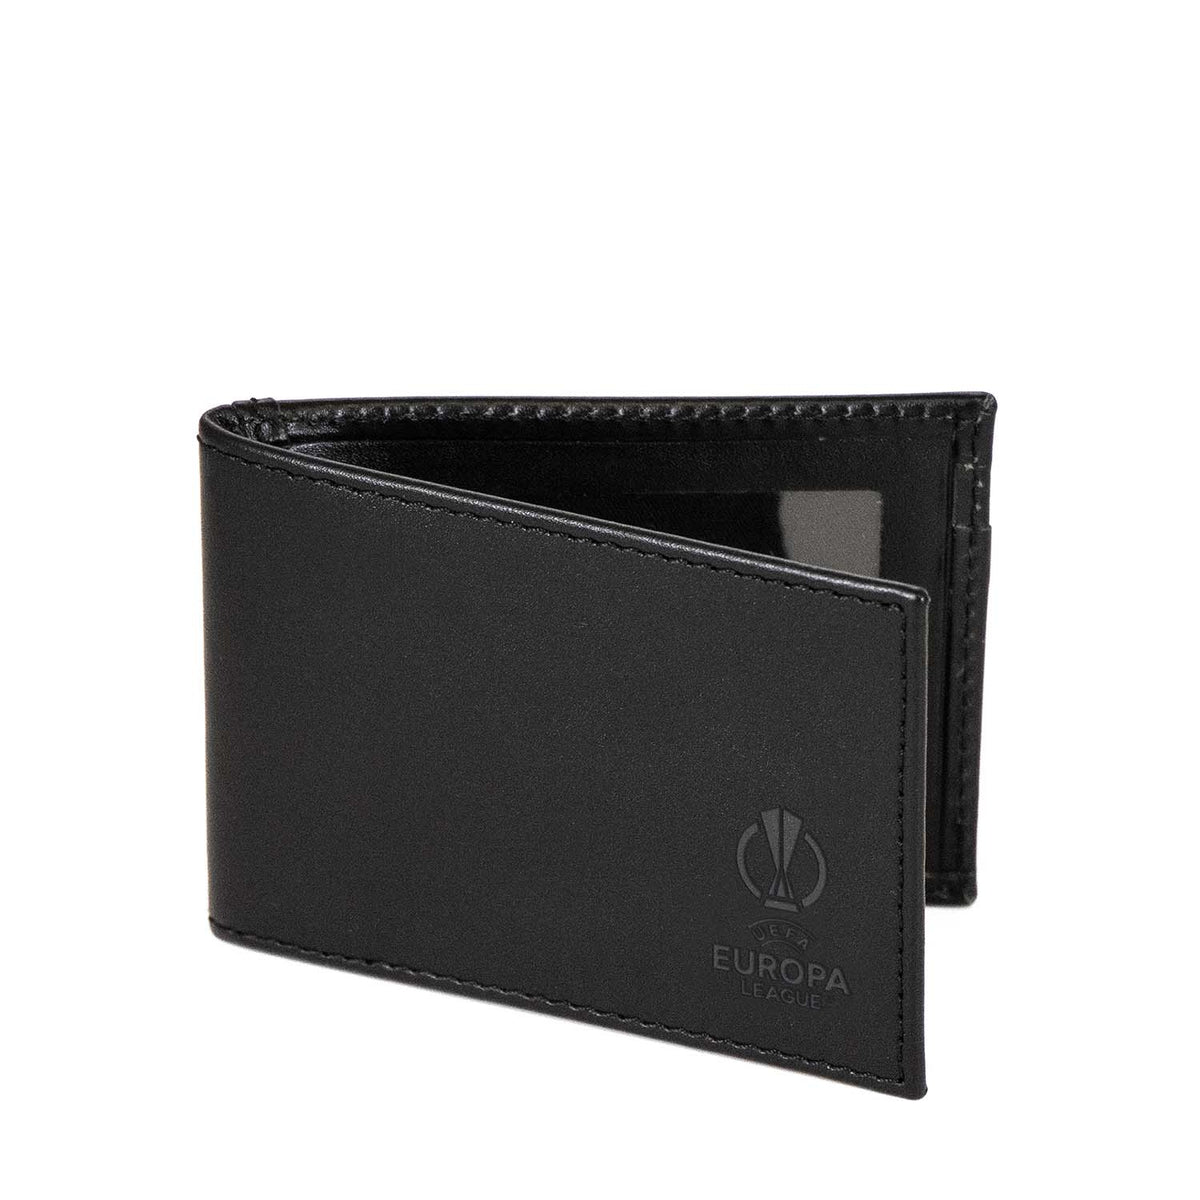 UEL Branded Travel ID Wallet UEFA Club Competitions Online Store